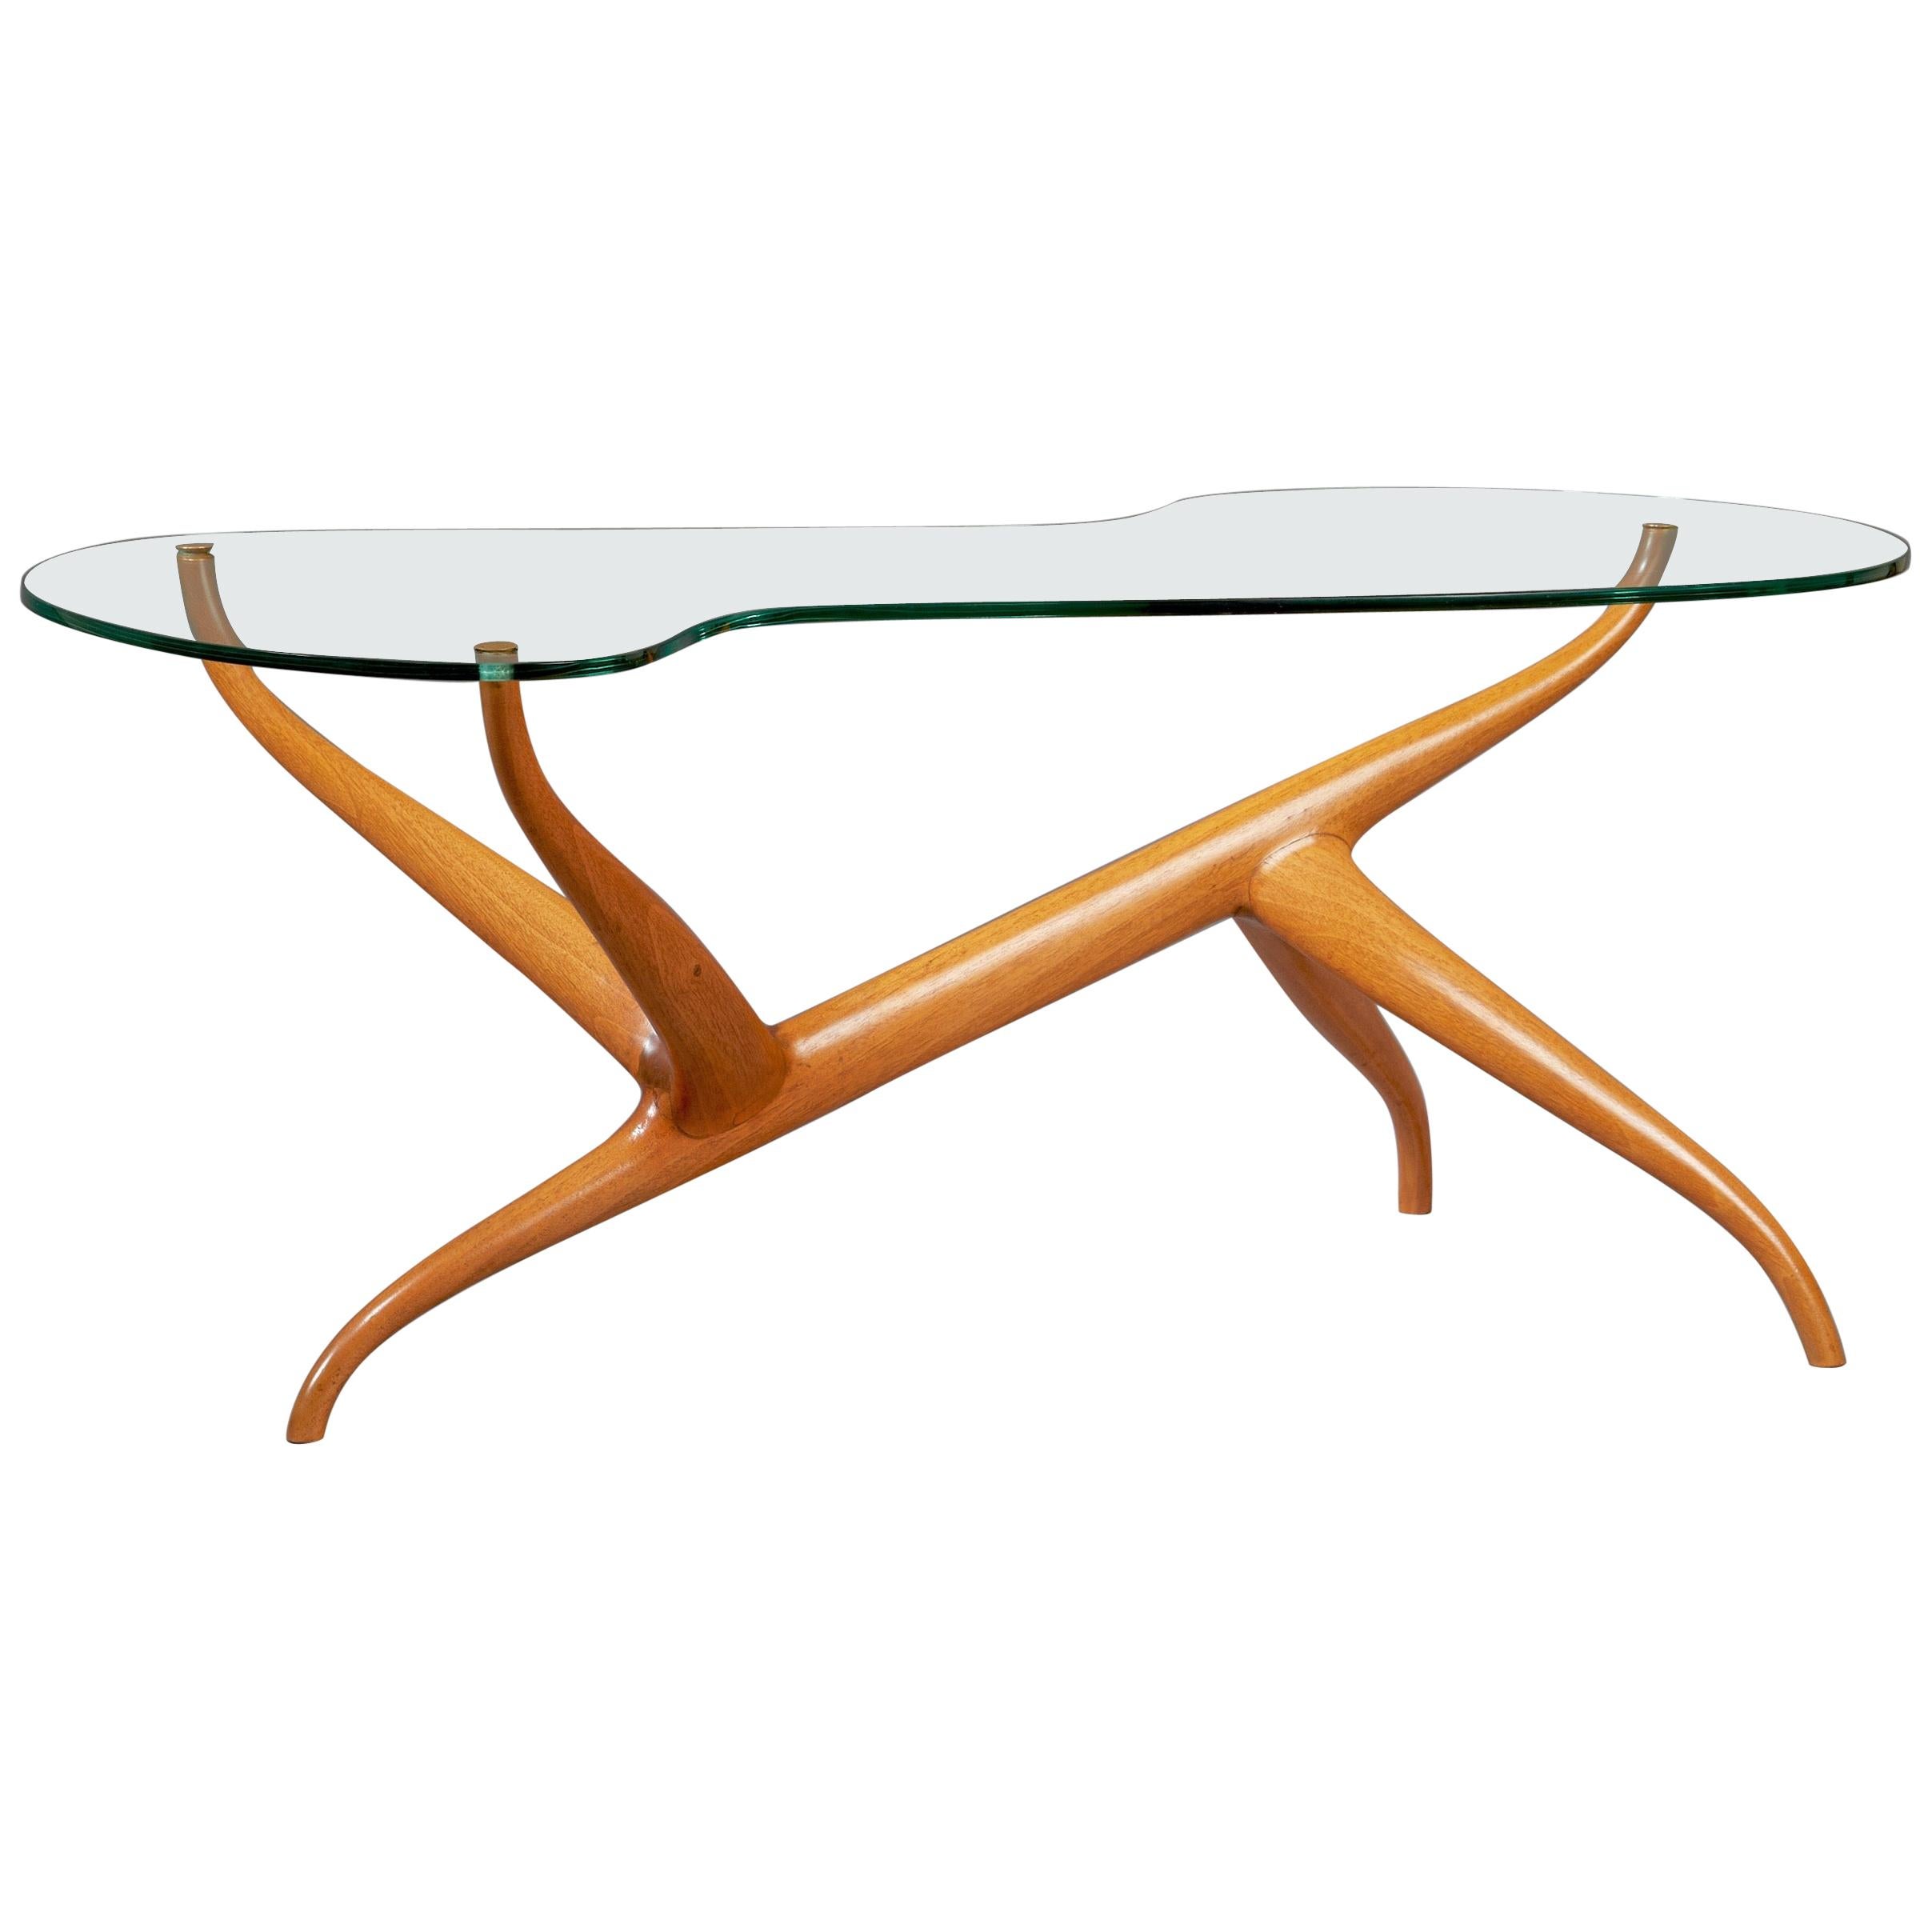 Pierluigi Giordani: Exceptional Sculptural Oak & Glass Coffee Table, Italy 1950s For Sale